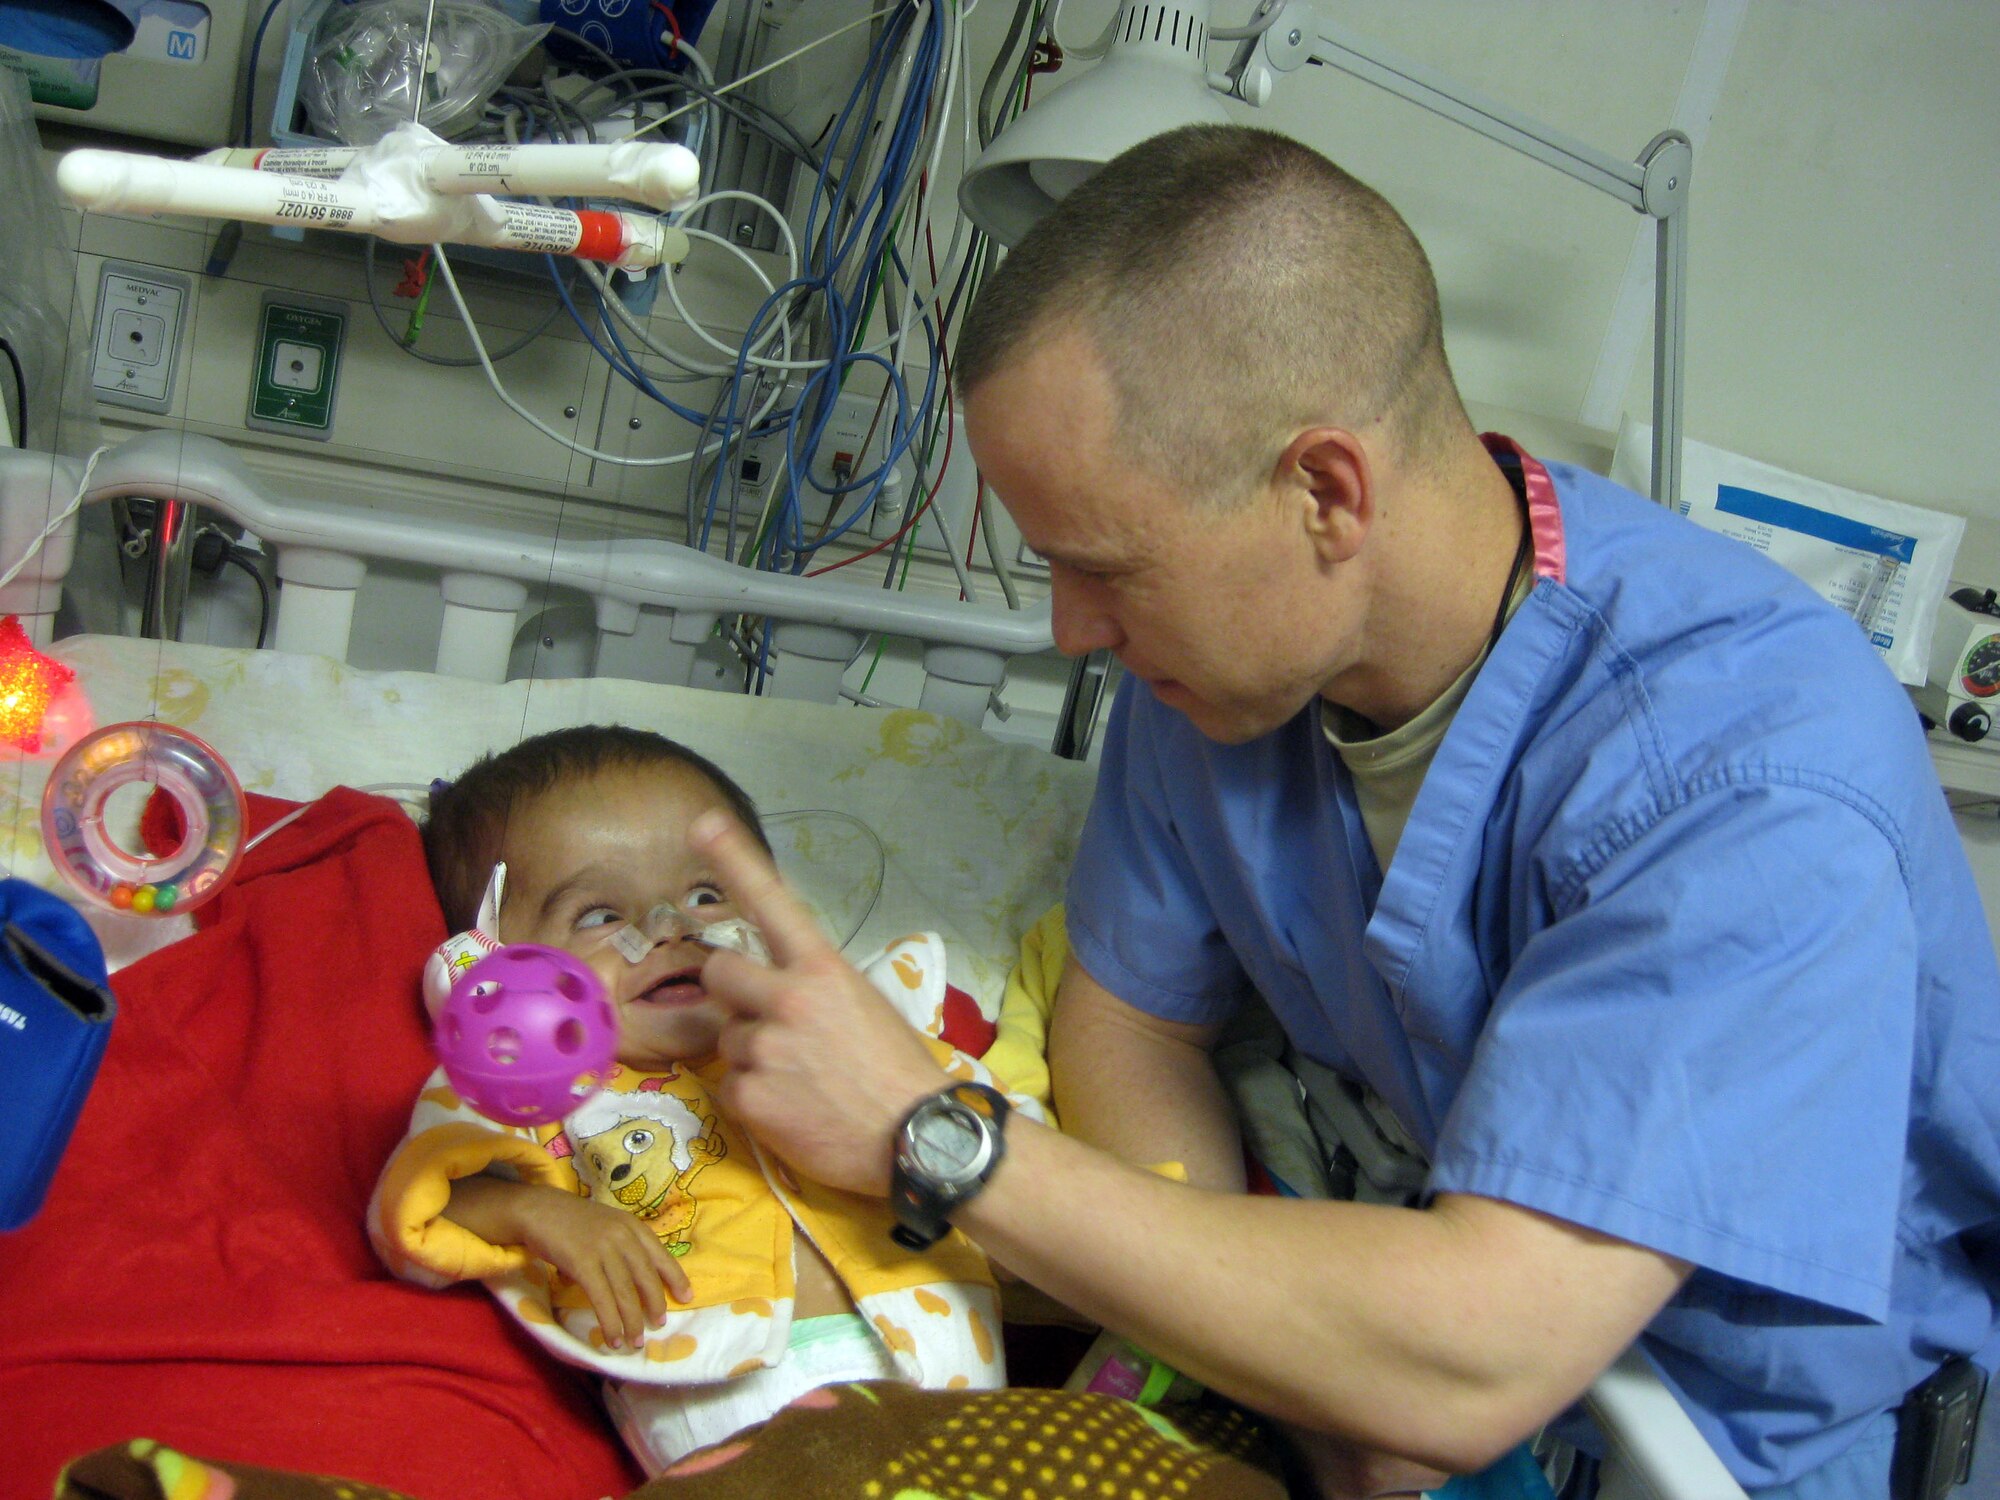 AFGHANISTAN  -- Dr. (Maj.) Christopher Wilhelm provides medical care for a 14-month old baby boy with hydrocephalus May 25 in Afghanistan. A buildup of cerebral spinal fluid putting pressure on the brain so severe the child couldn’t interact with his surroundings. After the procedure, the baby was able to perform normal child interactions. (Courtesy photo)